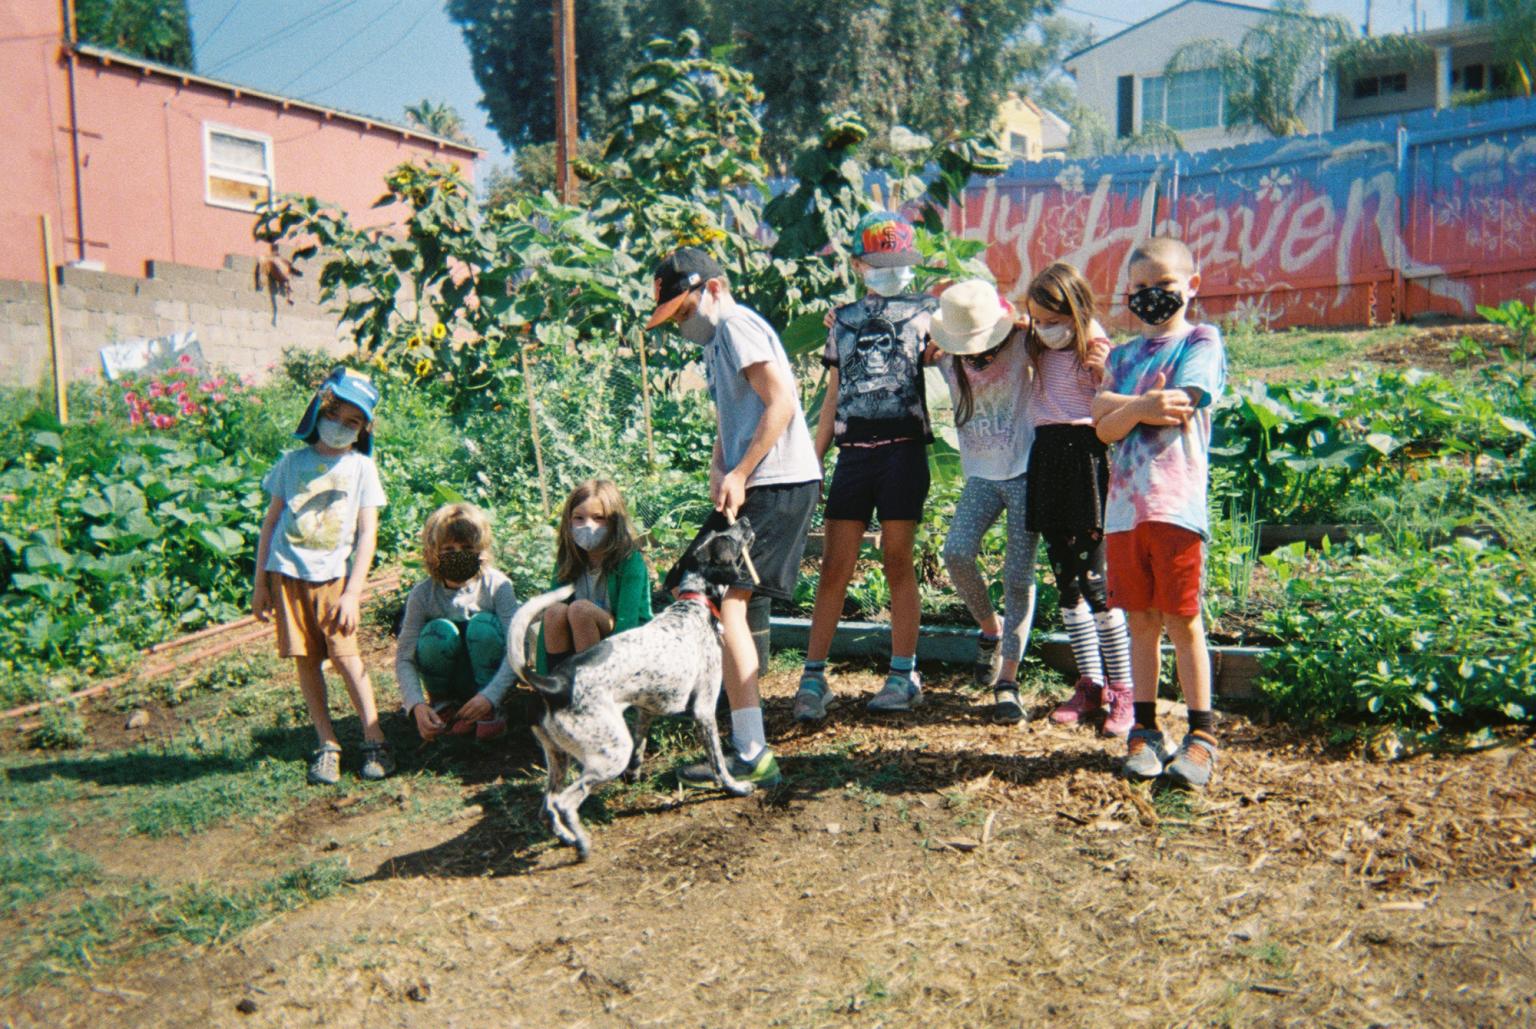 Kids at Muddy Heaven's urban garden, playing with a dog